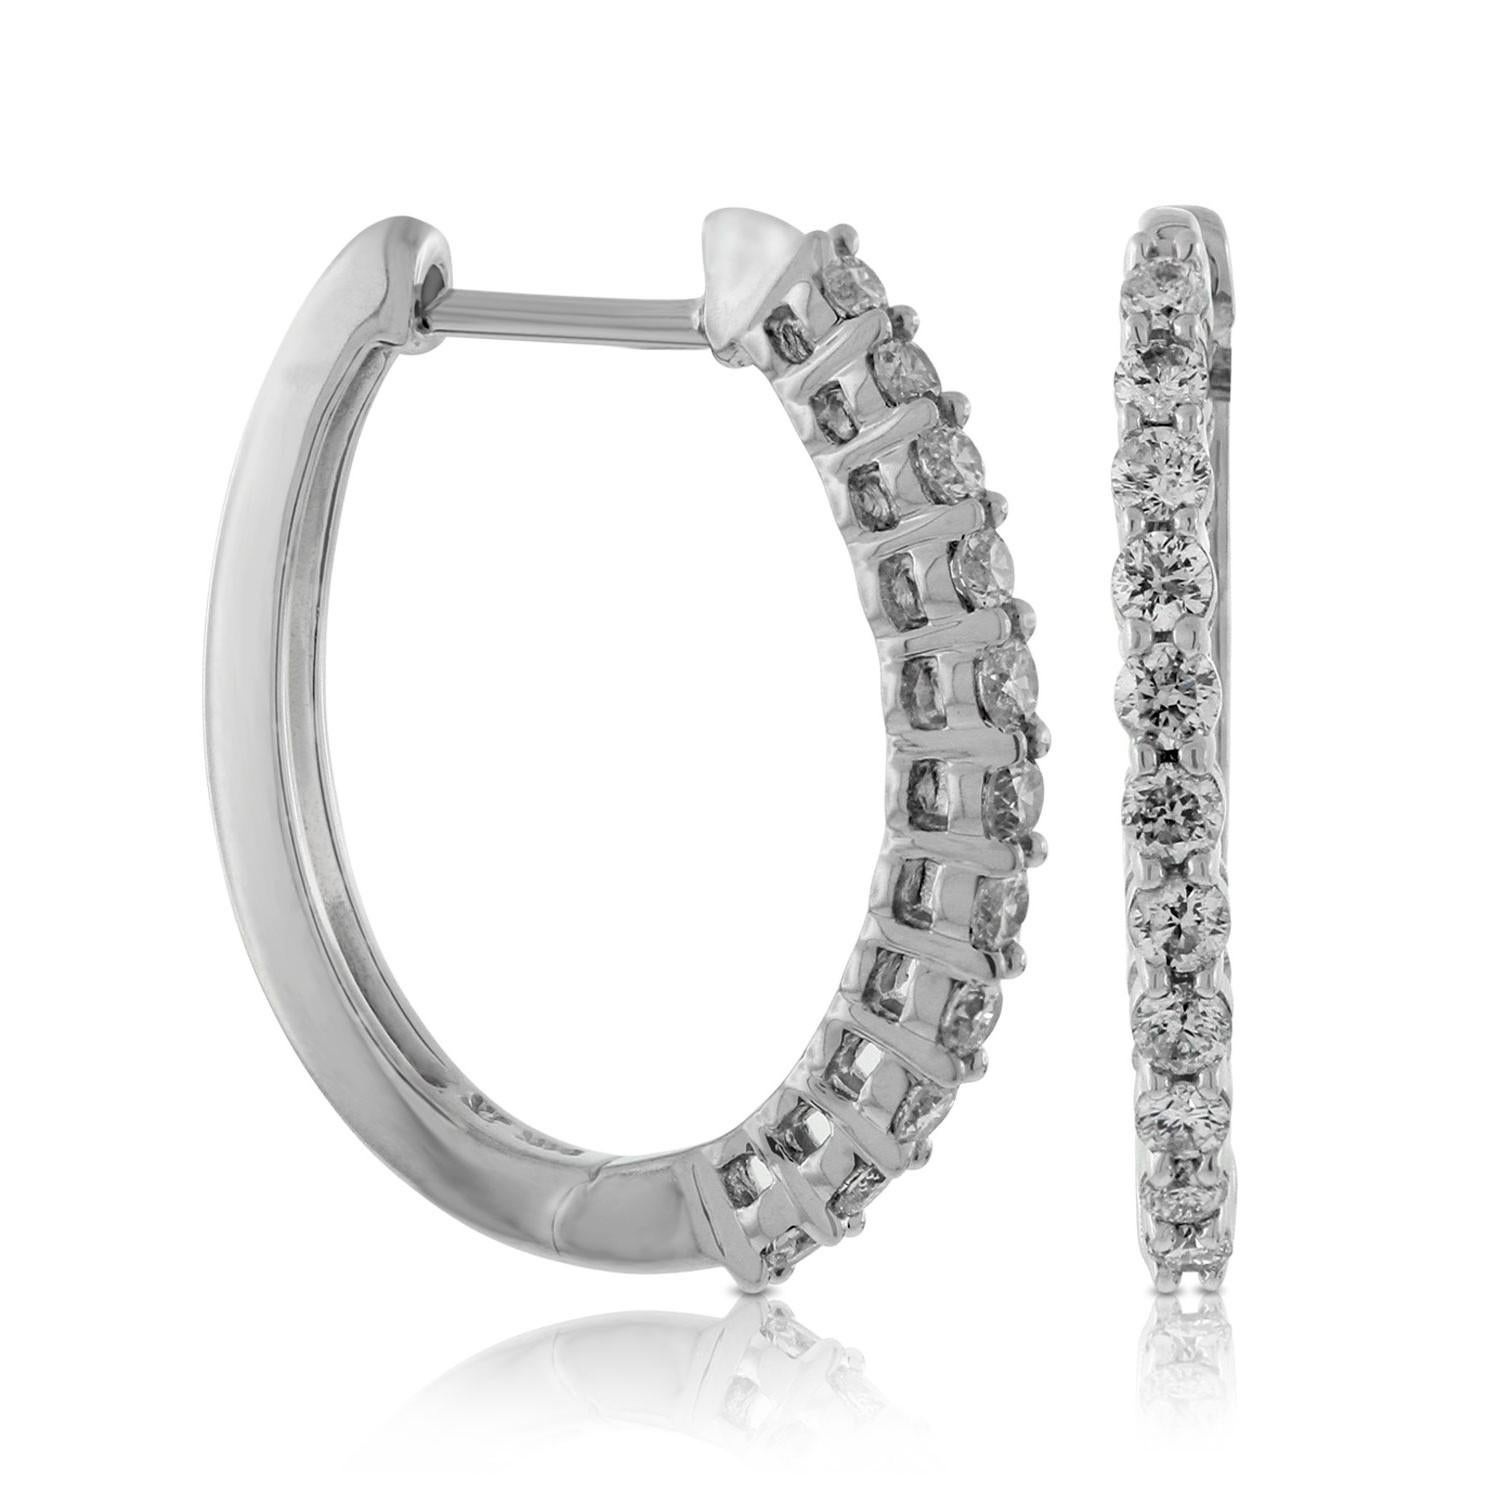 Nothing says luxury like an incredible pair of diamond round hoop earrings. These stunning brightly polished 14 karat white gold round-shaped hoop earrings feature a total of 26 round brilliant cut diamonds totaling .75 carats are prong set on the